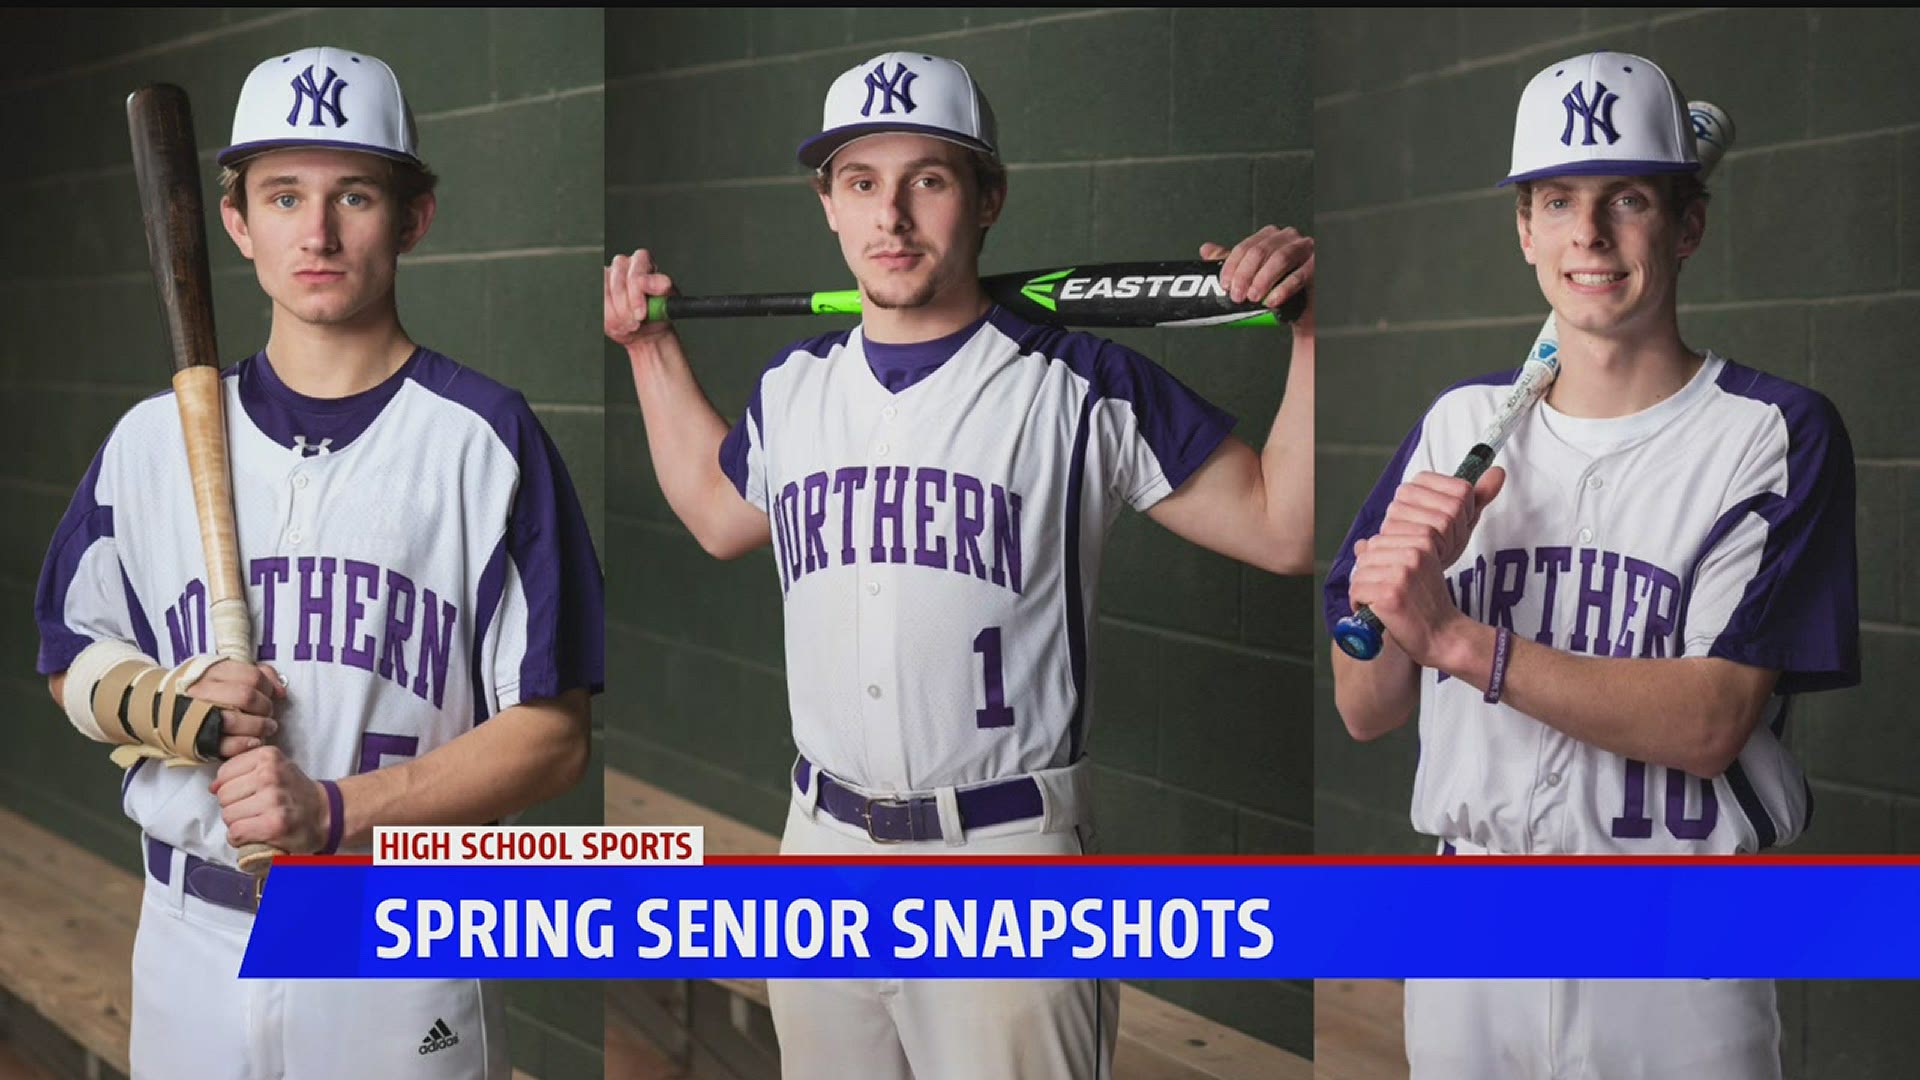 We feature Northern York baseball seniors Bryce Andrews, Luke Horvath and Nick Yinger in this edition of our Spring Senior Snapshots.